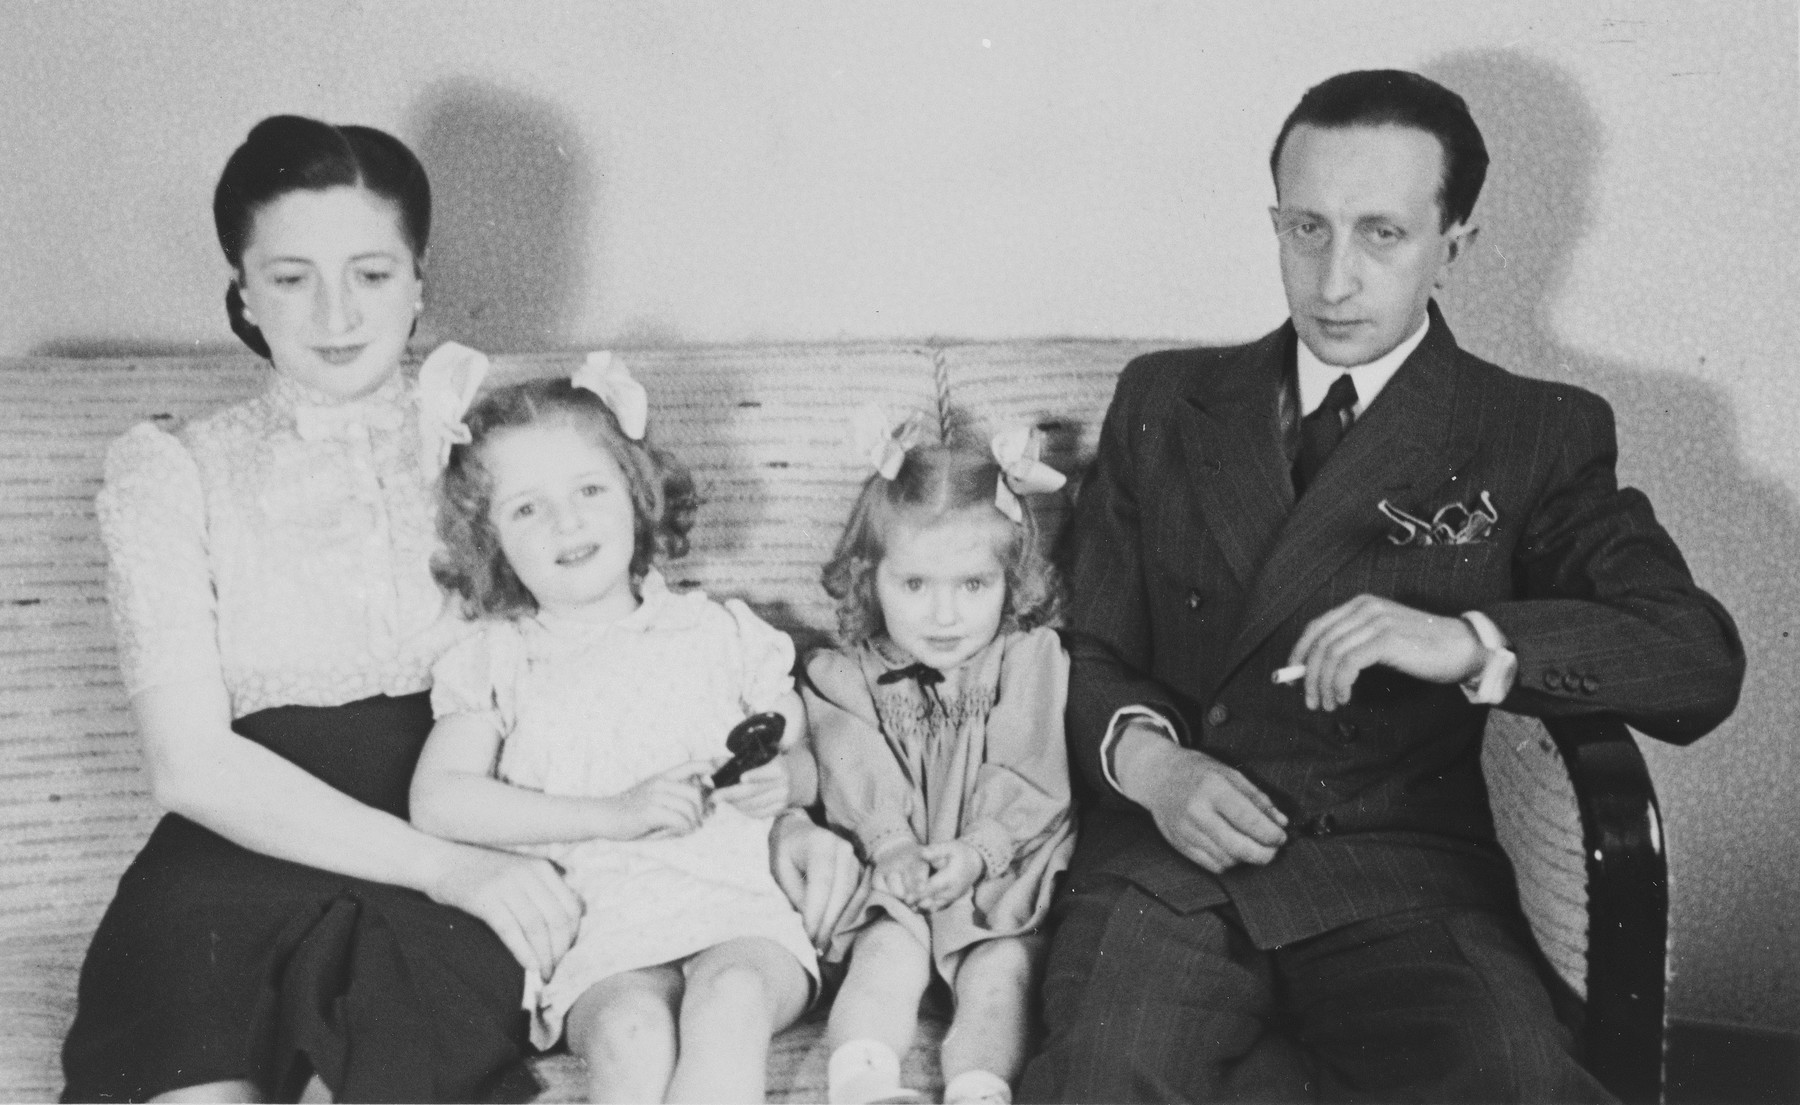 Simcha and Gitel Münzer pose with their two daughters, Eva (left) and Leana (right), in their home in The Hague.

The girls later perished in Auschwitz.